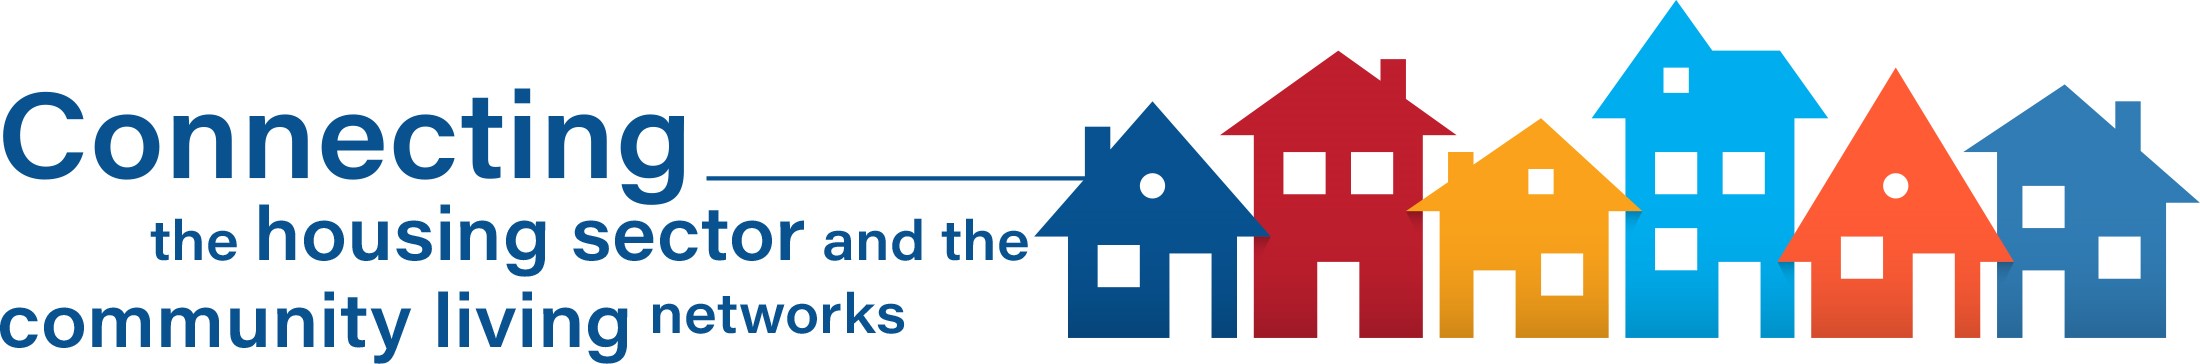 Connecting the housing sector and the community living networks